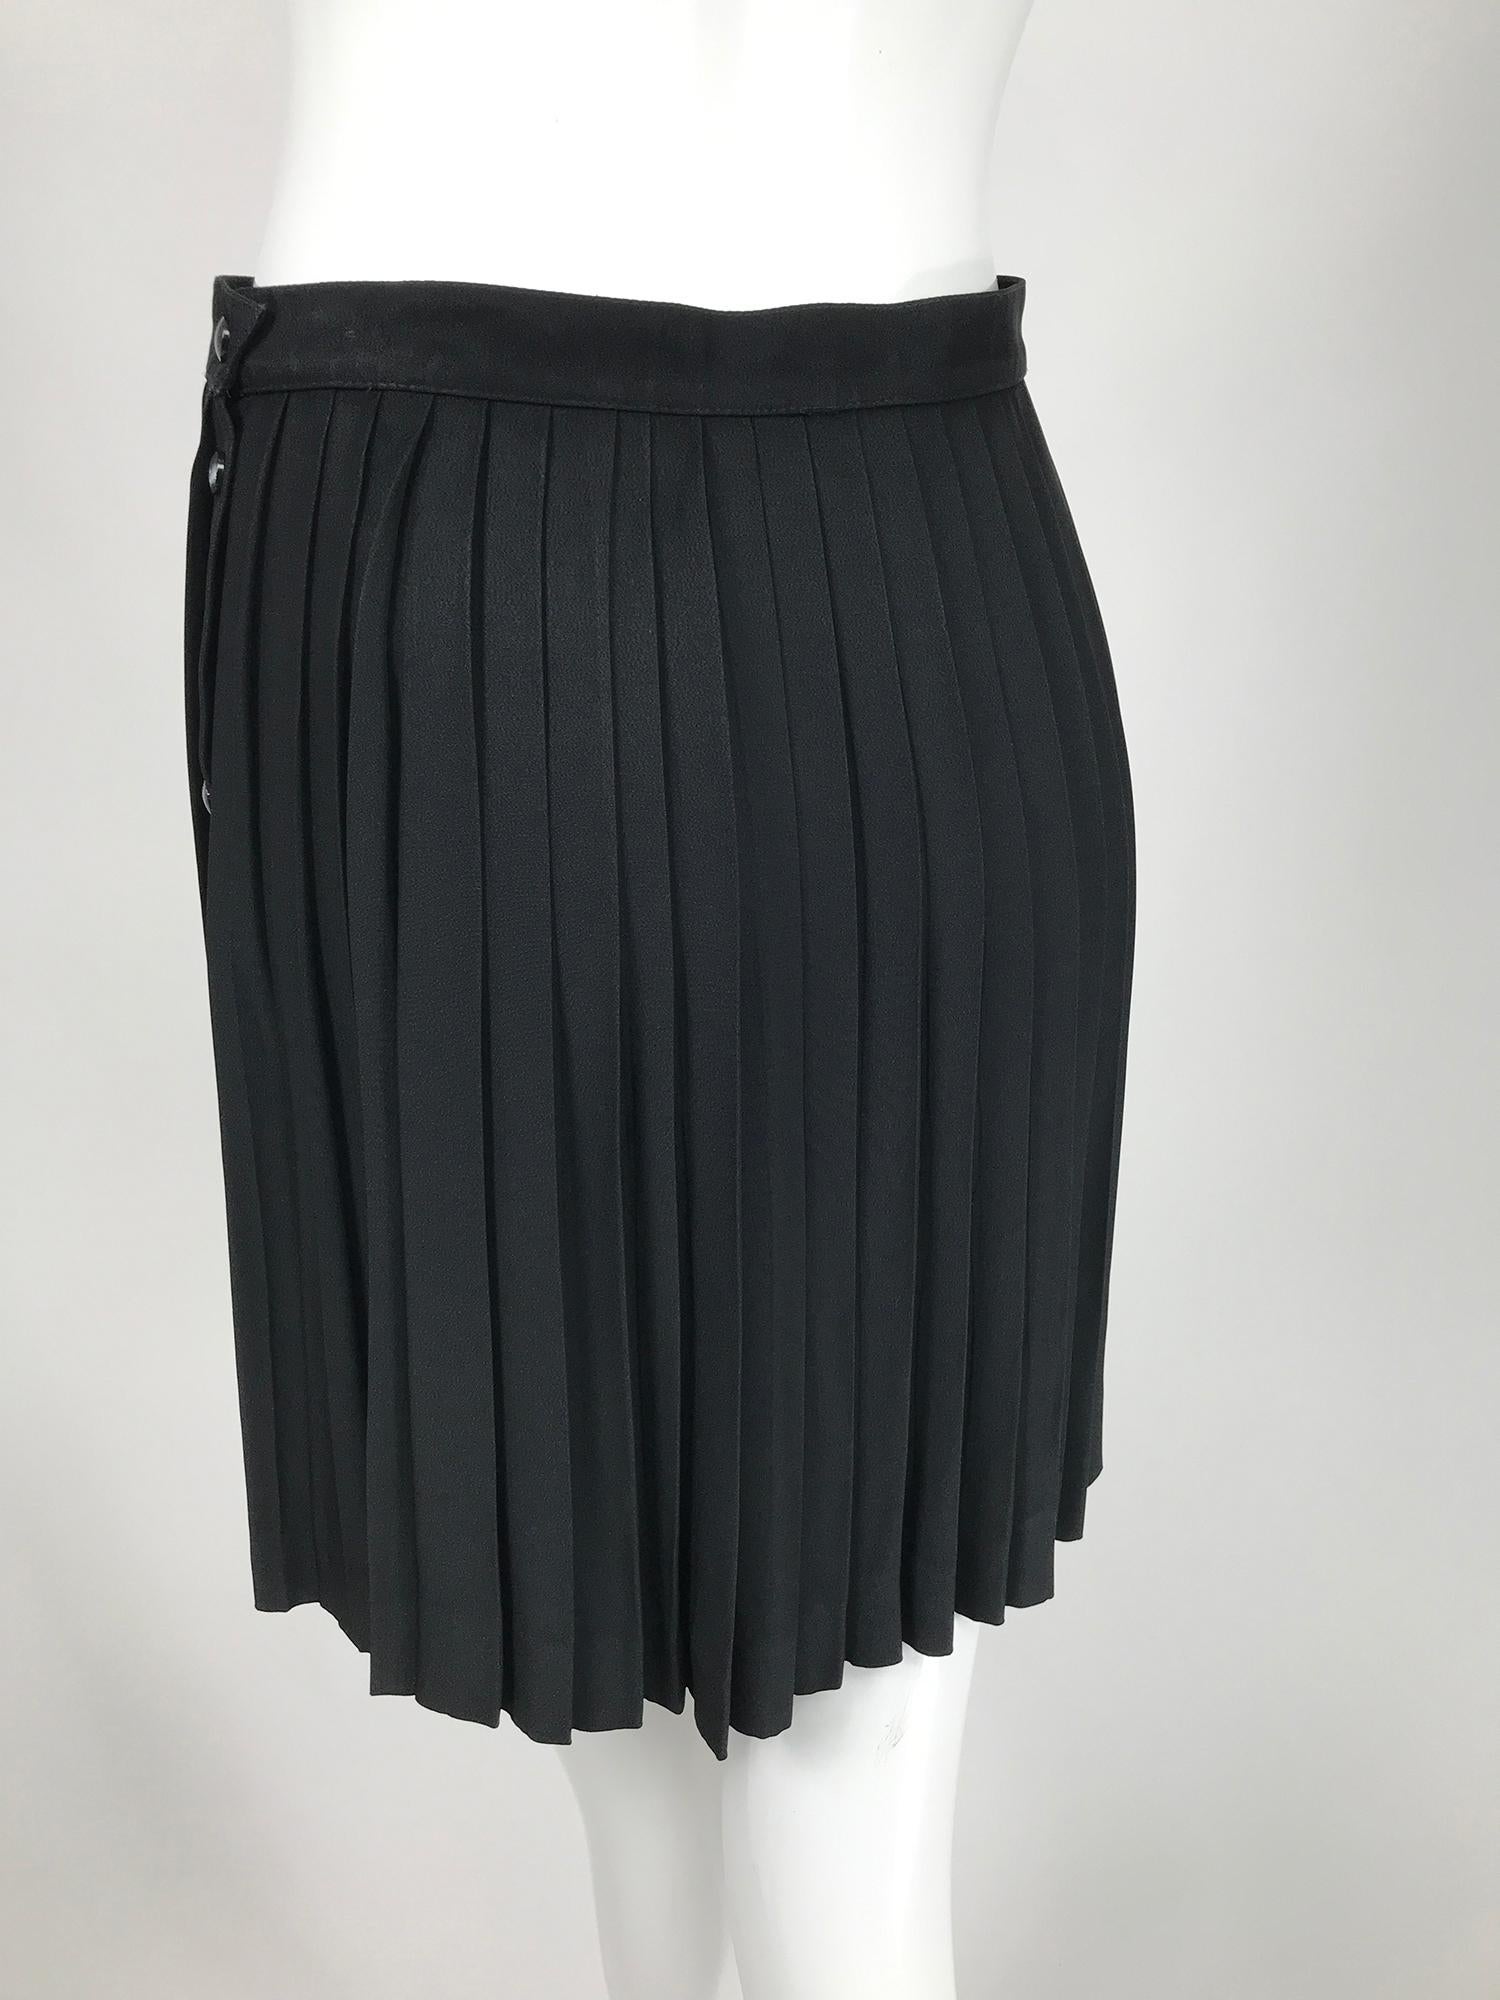 Women's Thierry Mugler Black Crepe Side Snap Pleated Mini Skirt 1980s For Sale